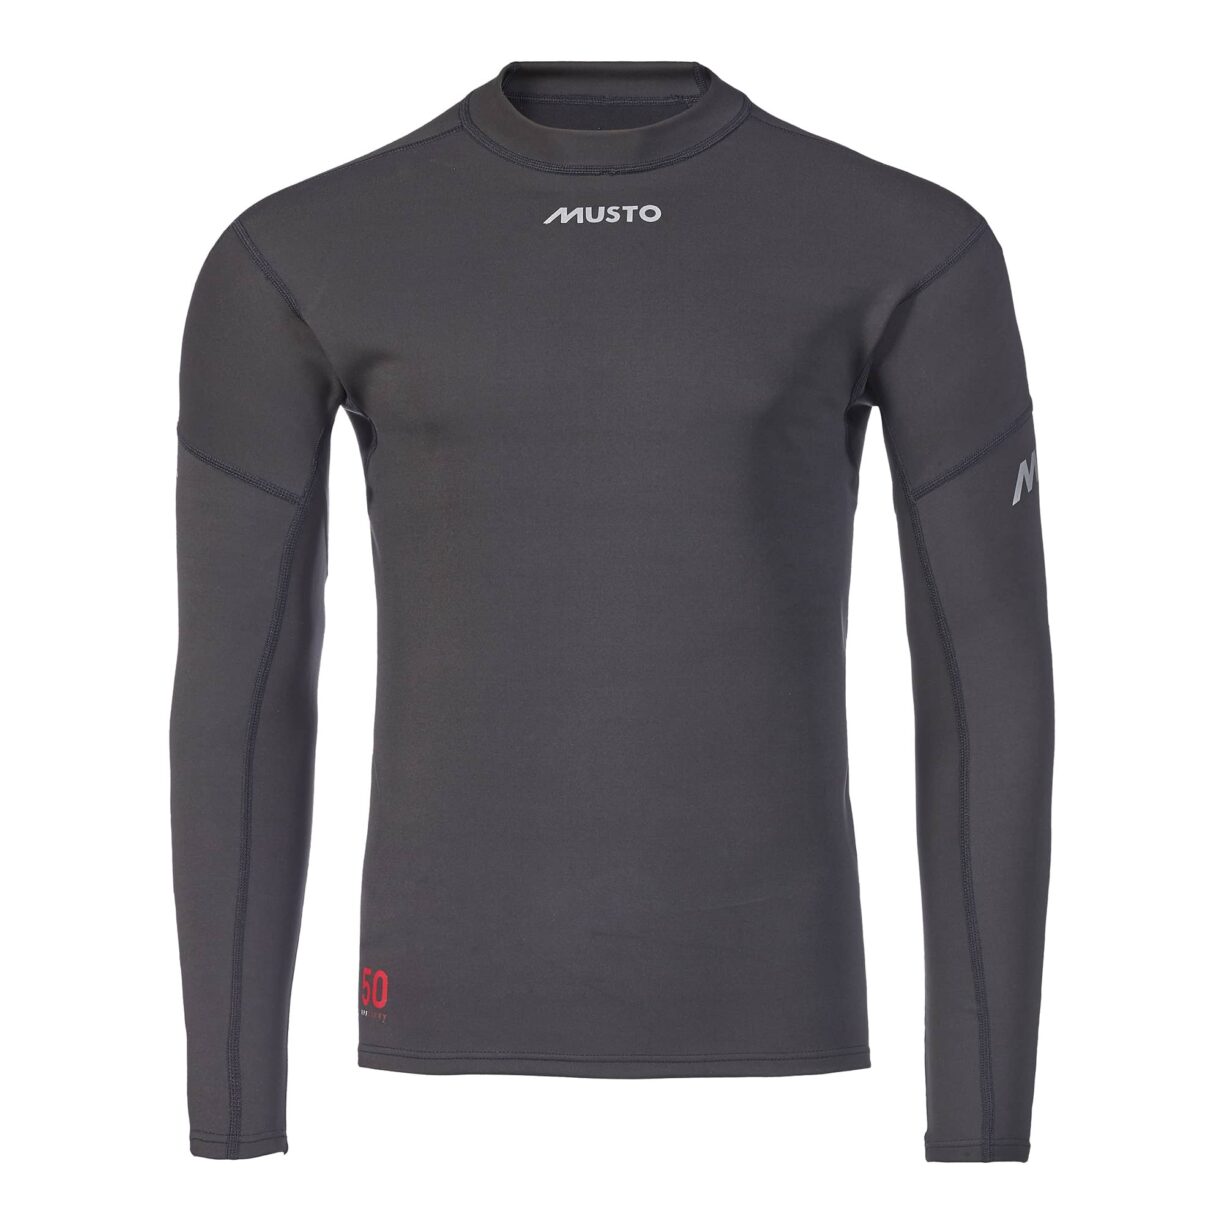 Musto lpx thermohot foiling top